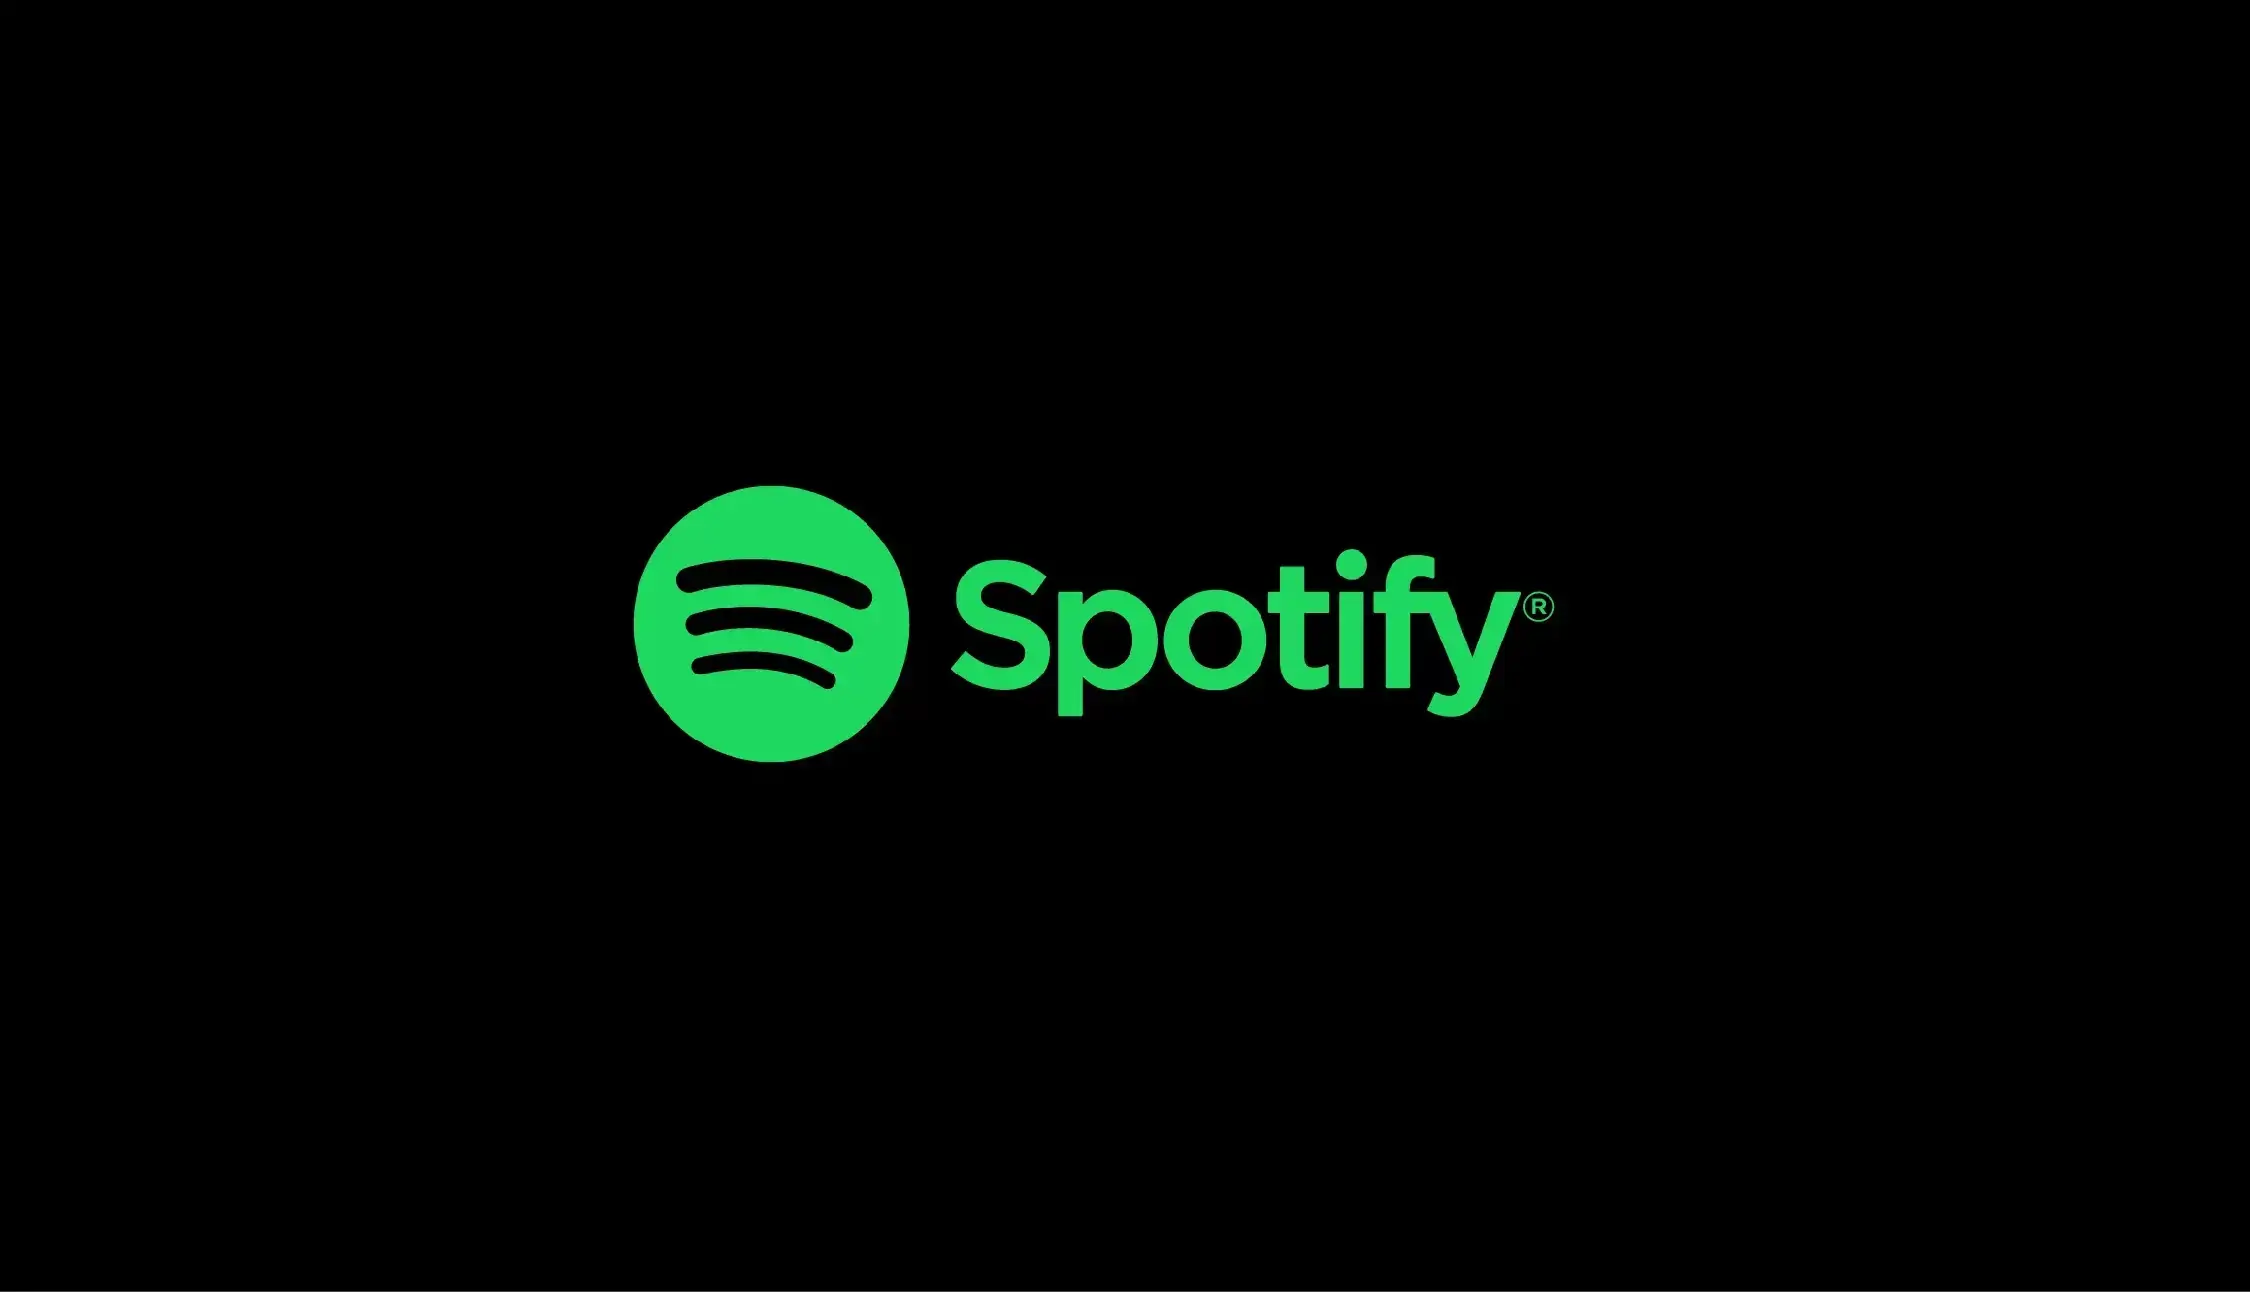 Spotify Expands Podcasting Team with New Copy Lead for Brand Voice